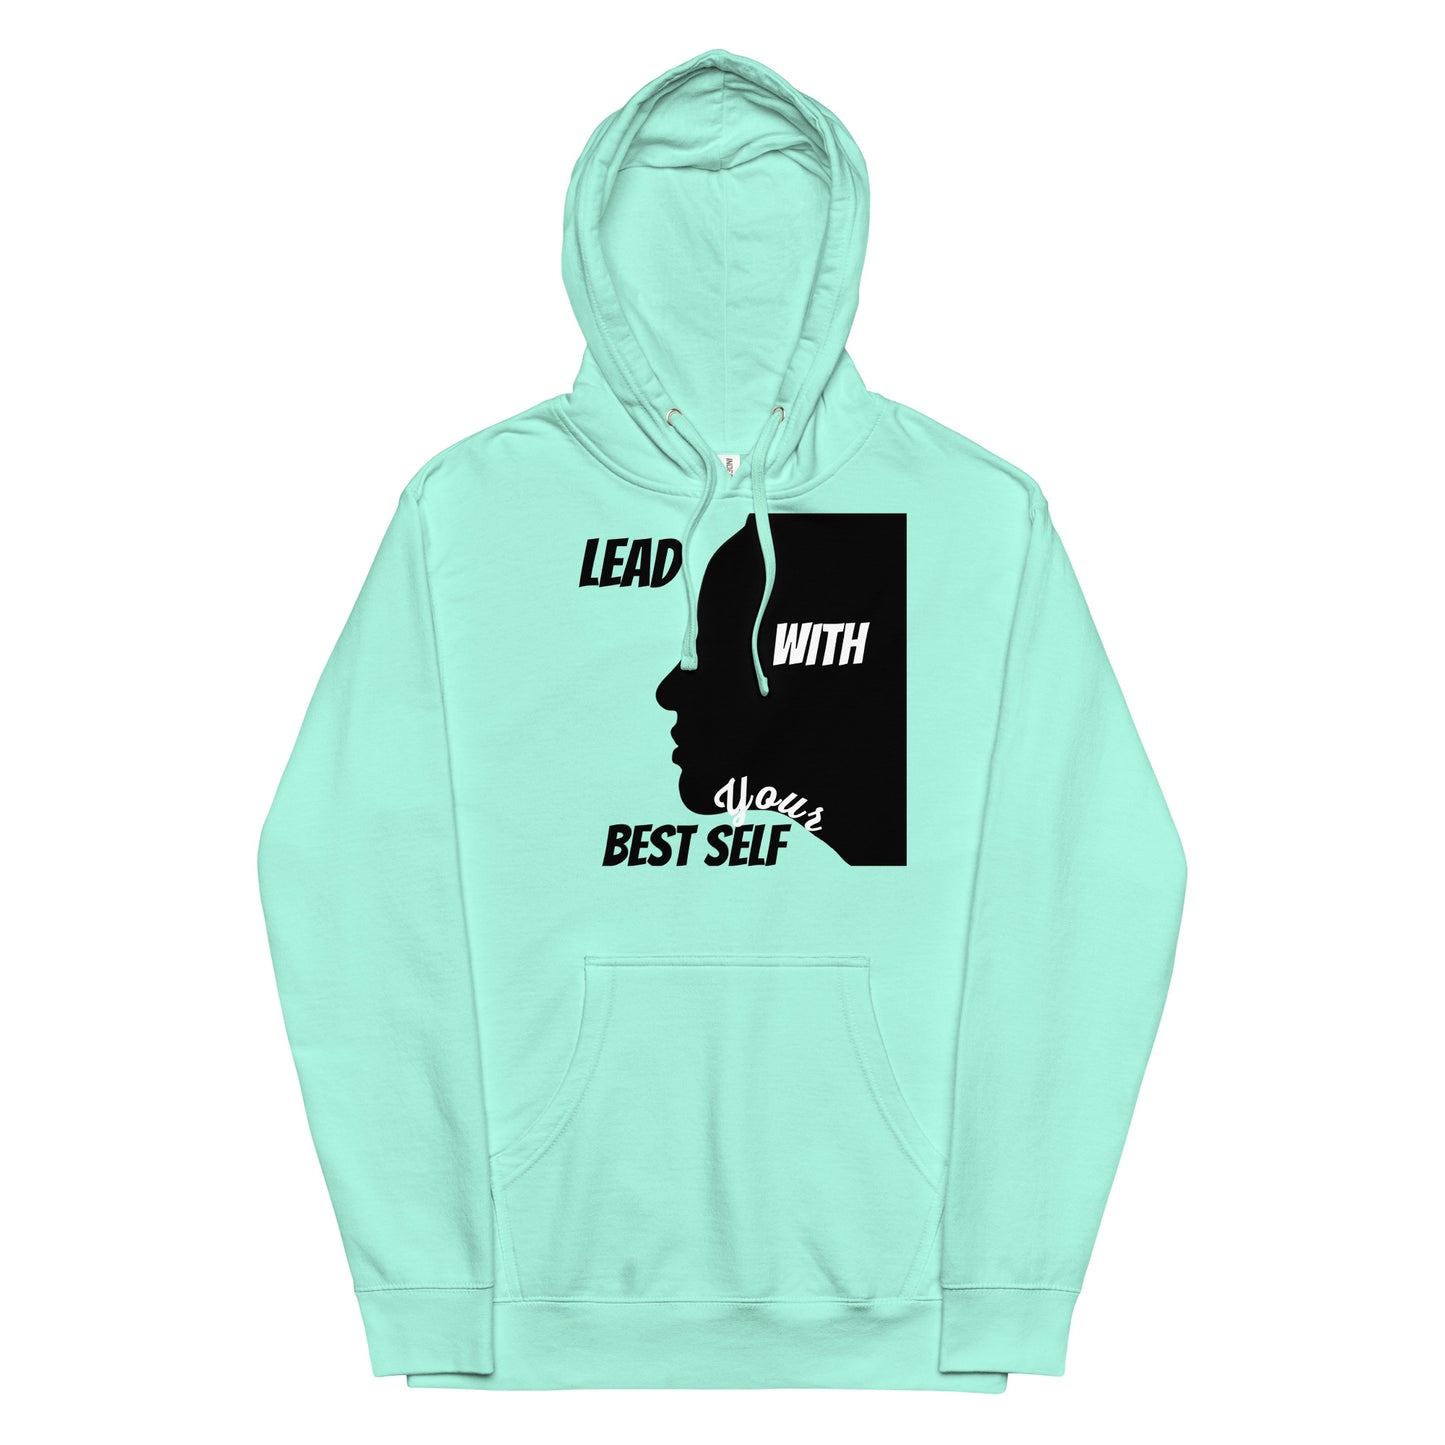 Light-Colored Mid-Weight Unisex LBS Hoodie – Stay warm and stylish, projecting bright vibes for your winter creations